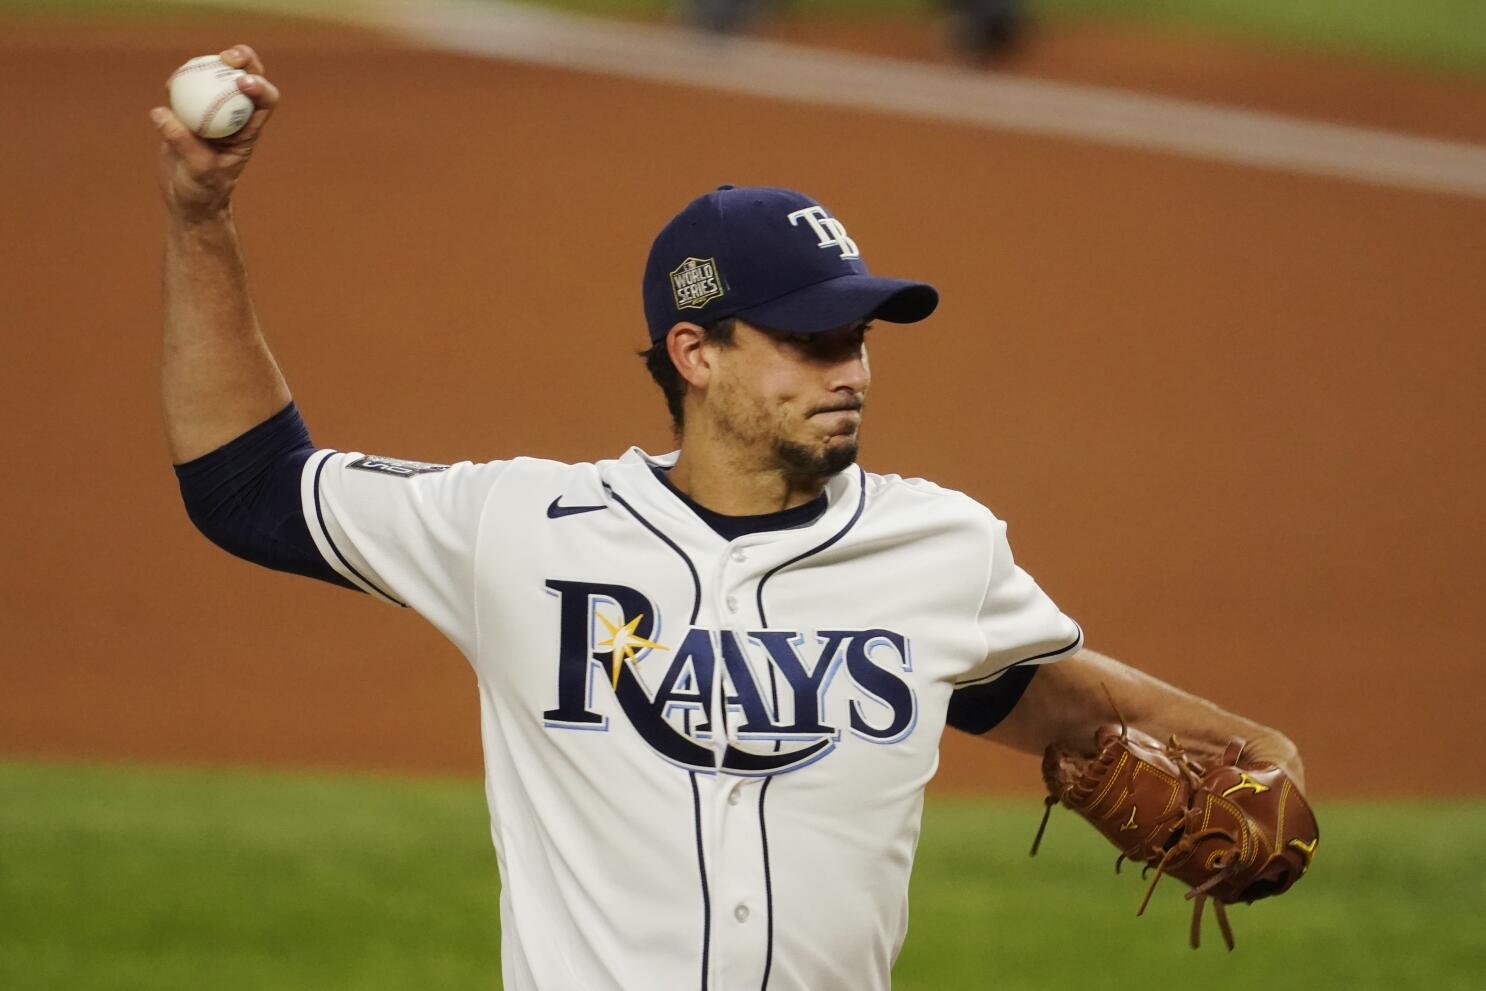 Rays decline options on RHP Charlie Morton, C Mike Zunino - The